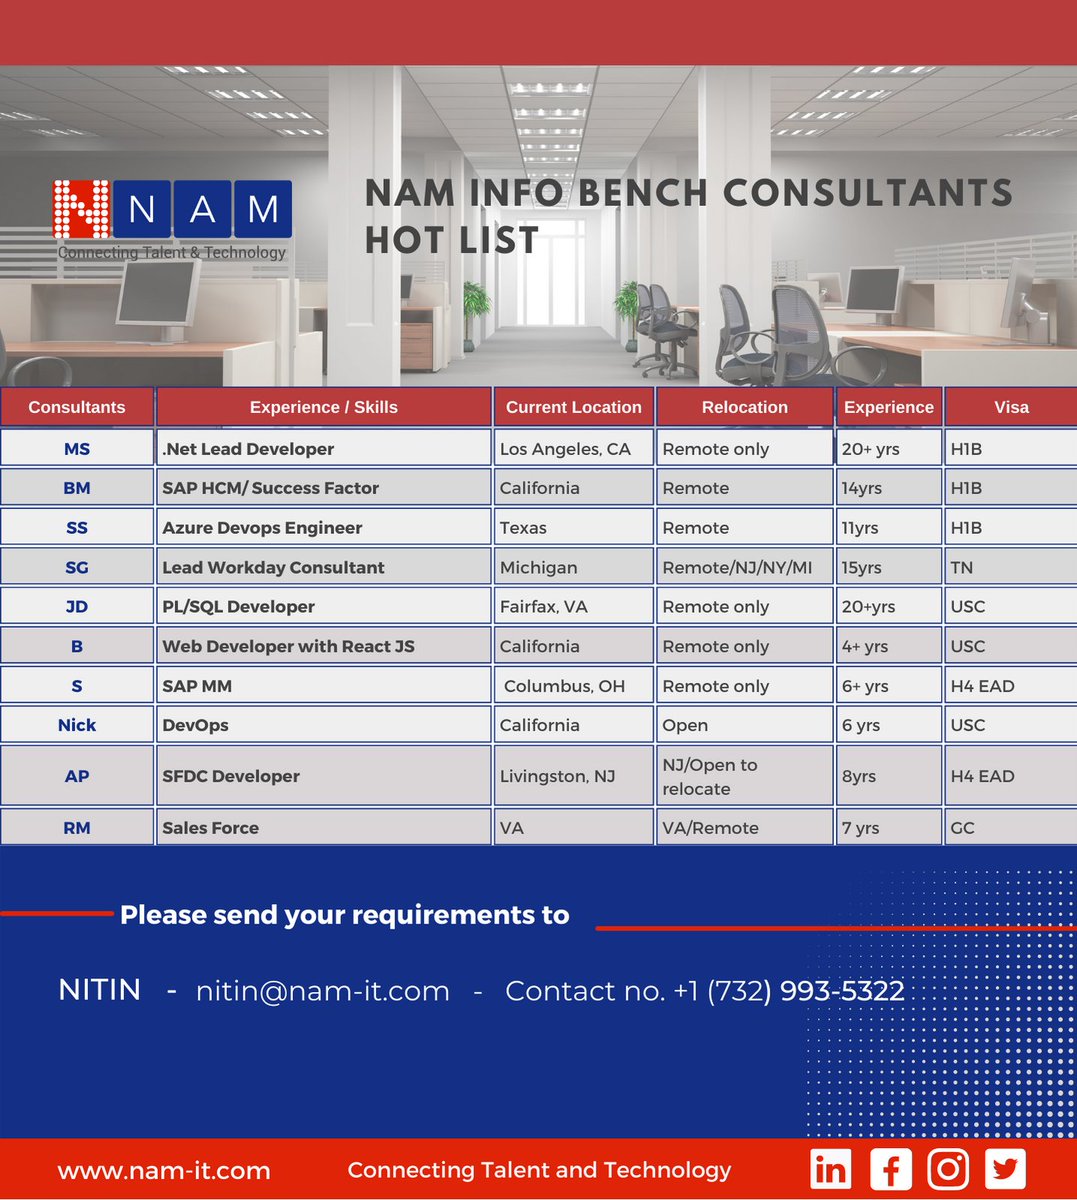 #BENCHLIST of available CONSULTANTS actively looking for new projects. Reach out to below contacts with your reqs -
Nitin - nitin@nam-it.com - Ph +1 732-993-5322
#hotlist #c2crequirements #usrecruitment #jobsearch #dotnetdeveloper #dotnetlead #azuredevops #workdayjobs  #saphcm